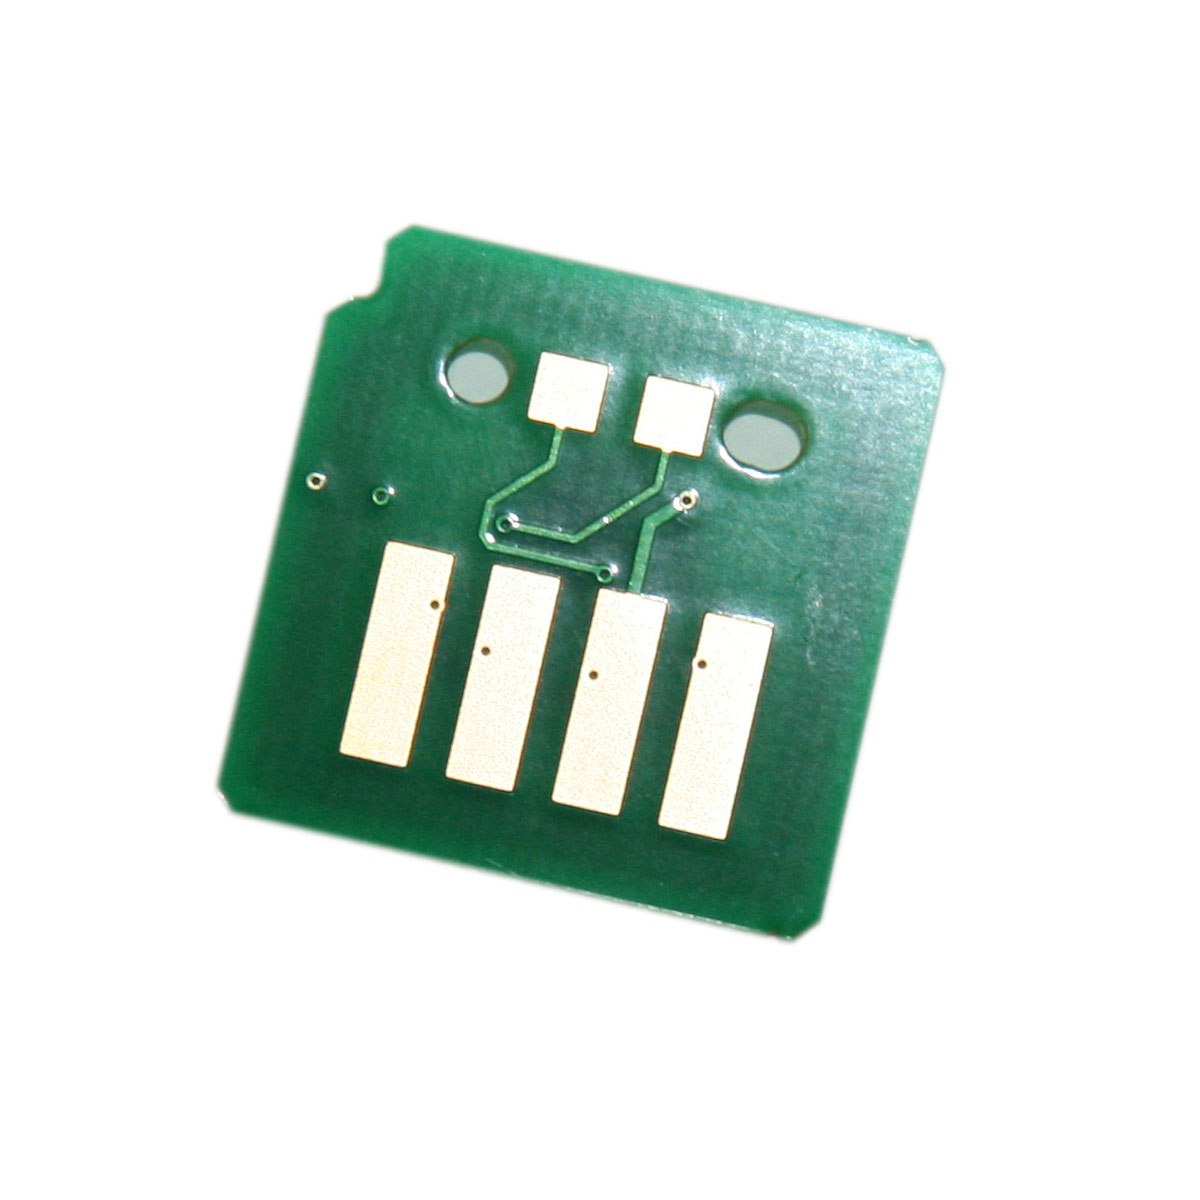 Counter chip for Drum Module Xerox WorkCentre 7535